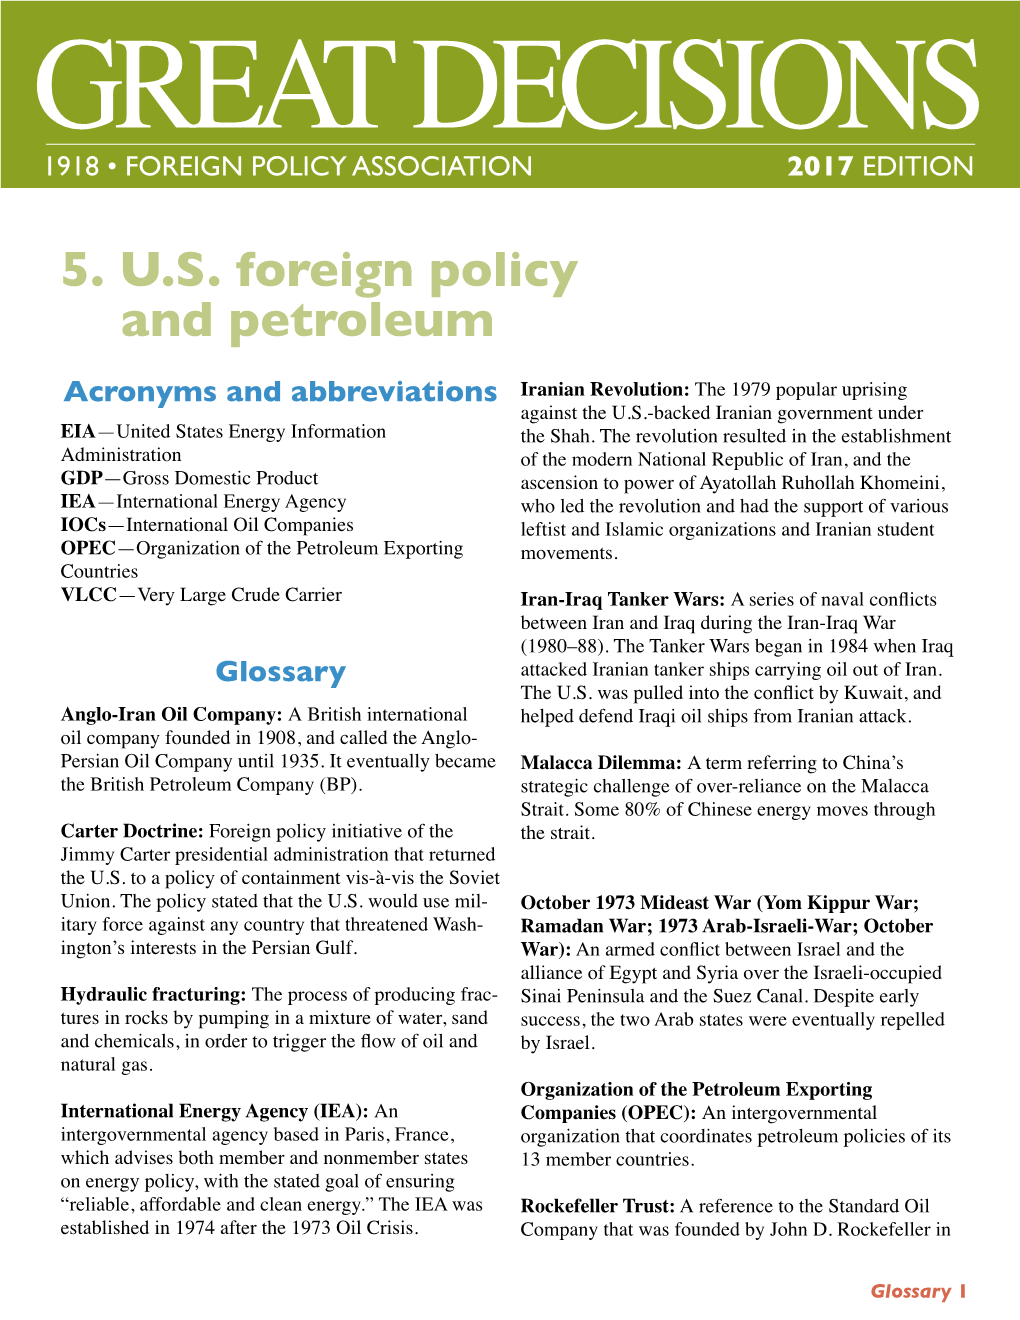 5. US Foreign Policy and Petroleum